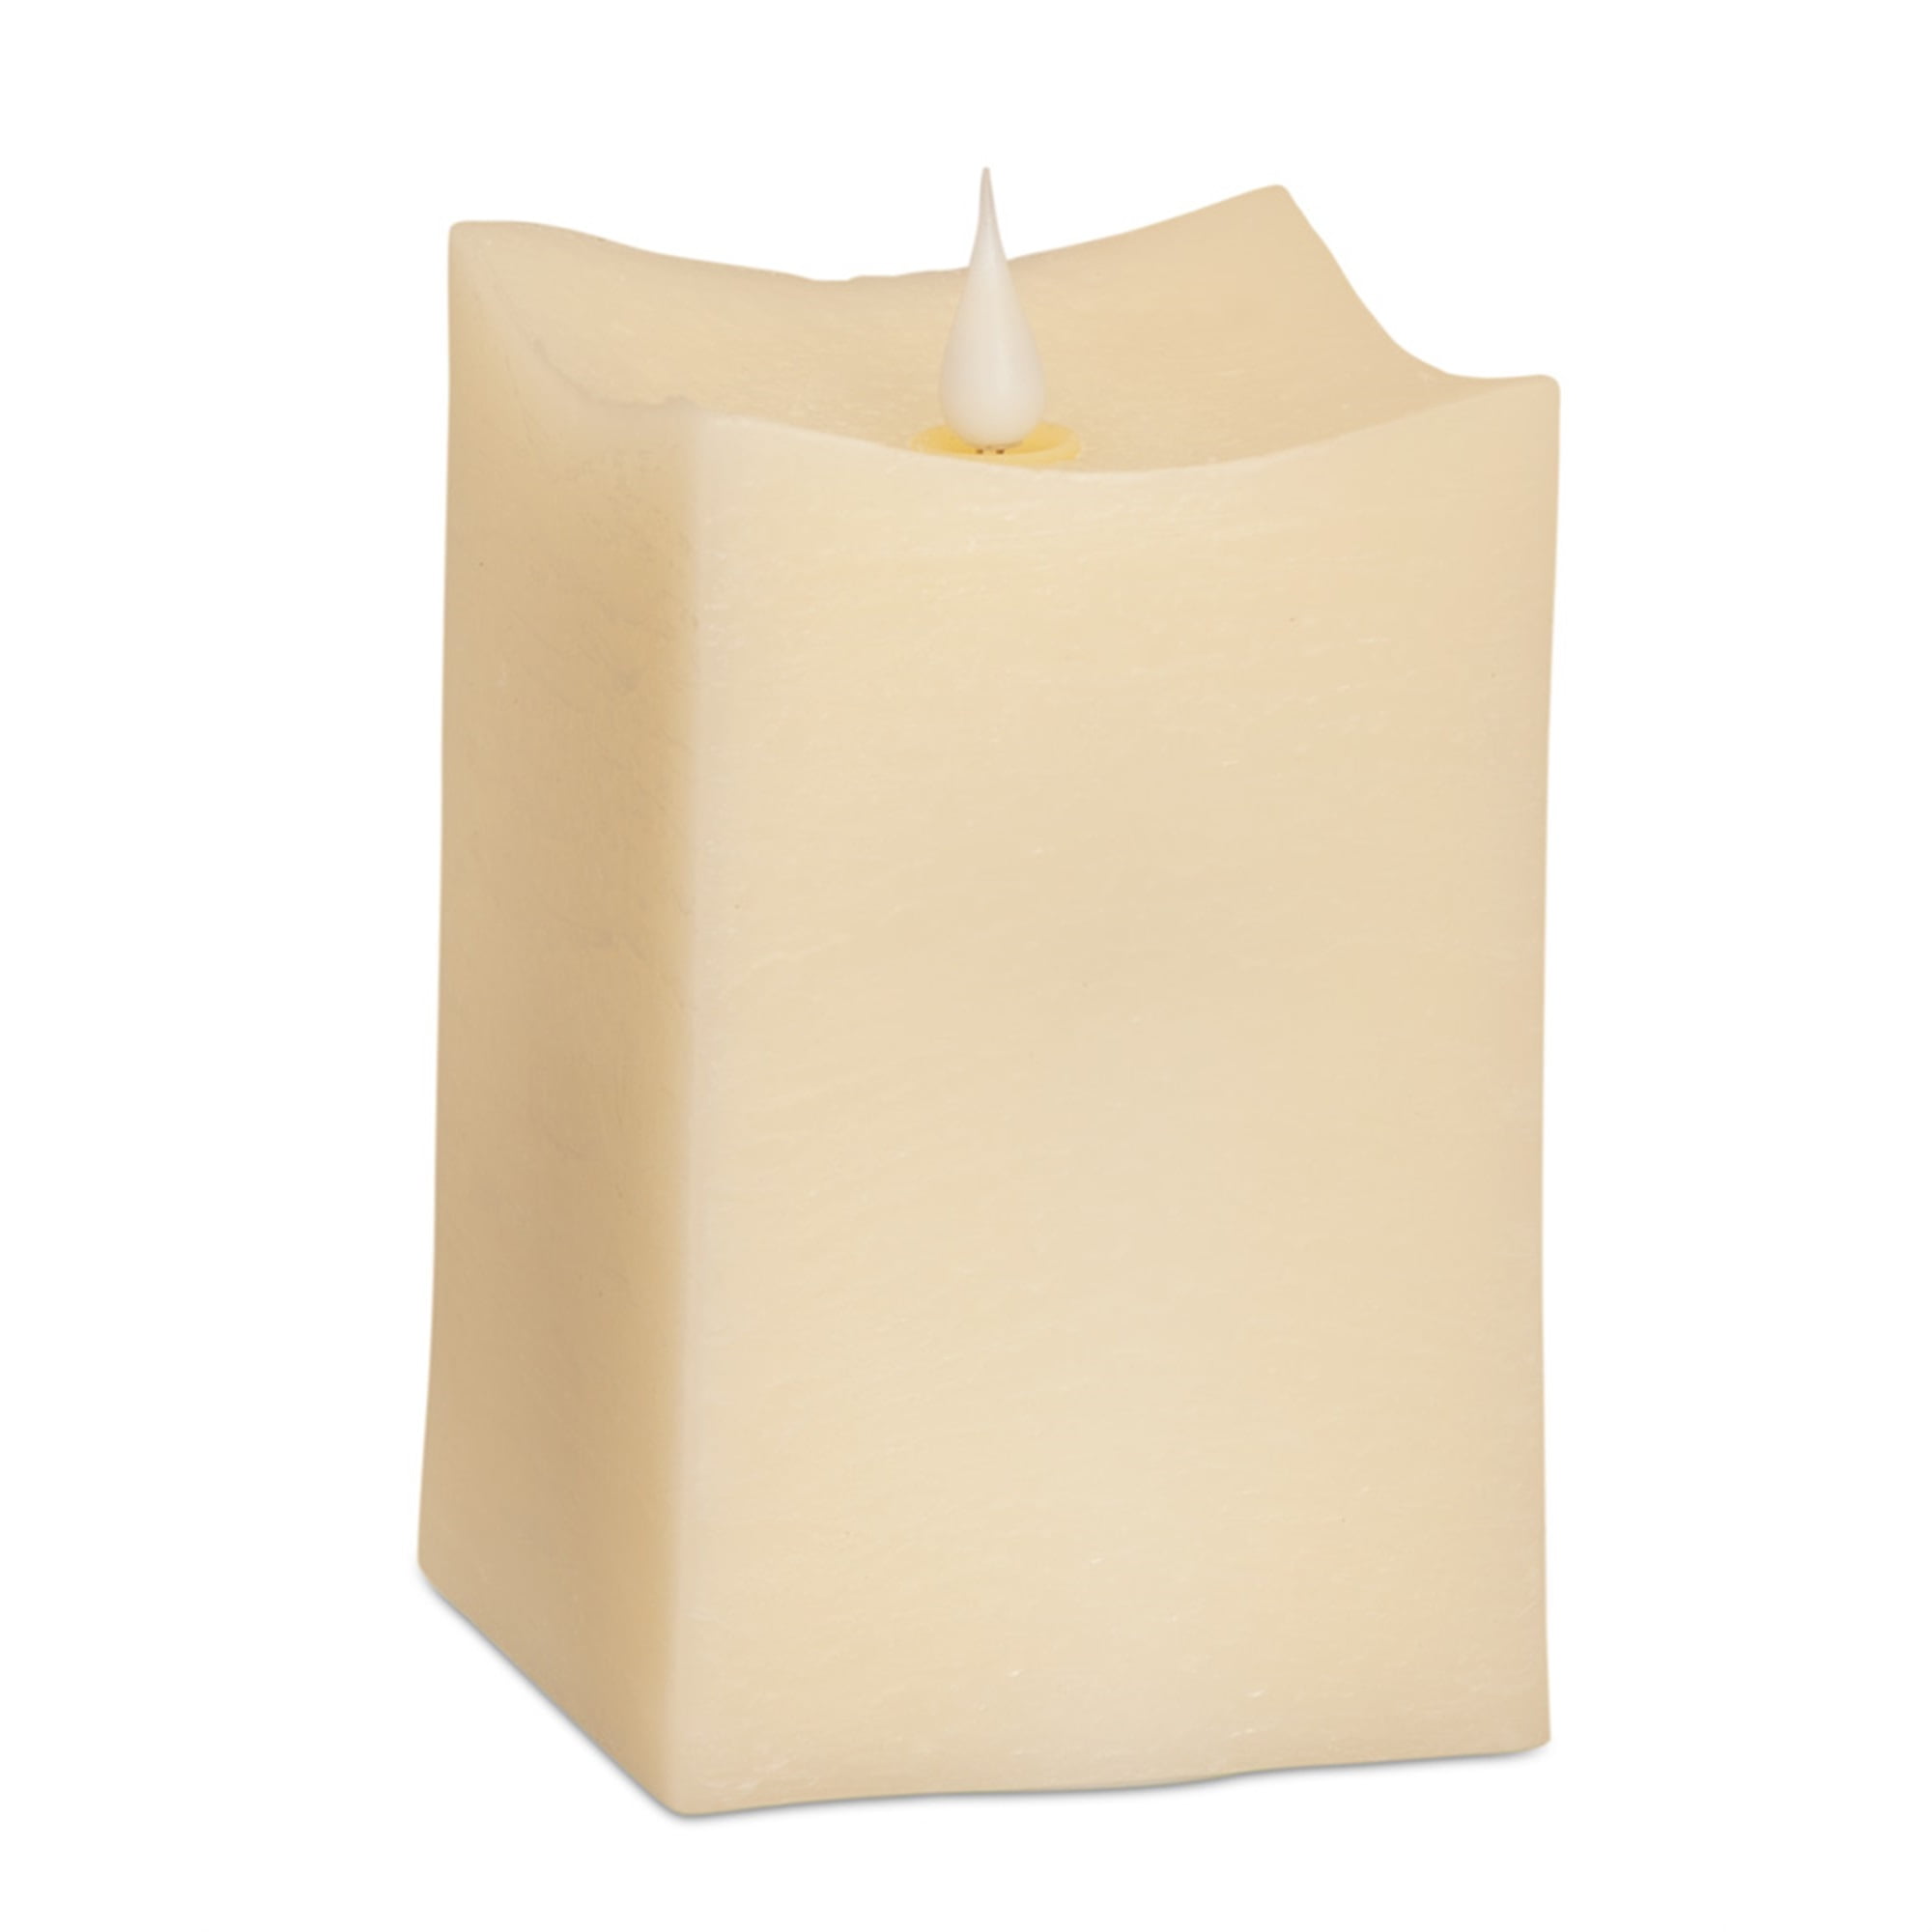 Simplux Squared Candle w/Moving Flame (Set of 2) 3.5"SQ x 5"H